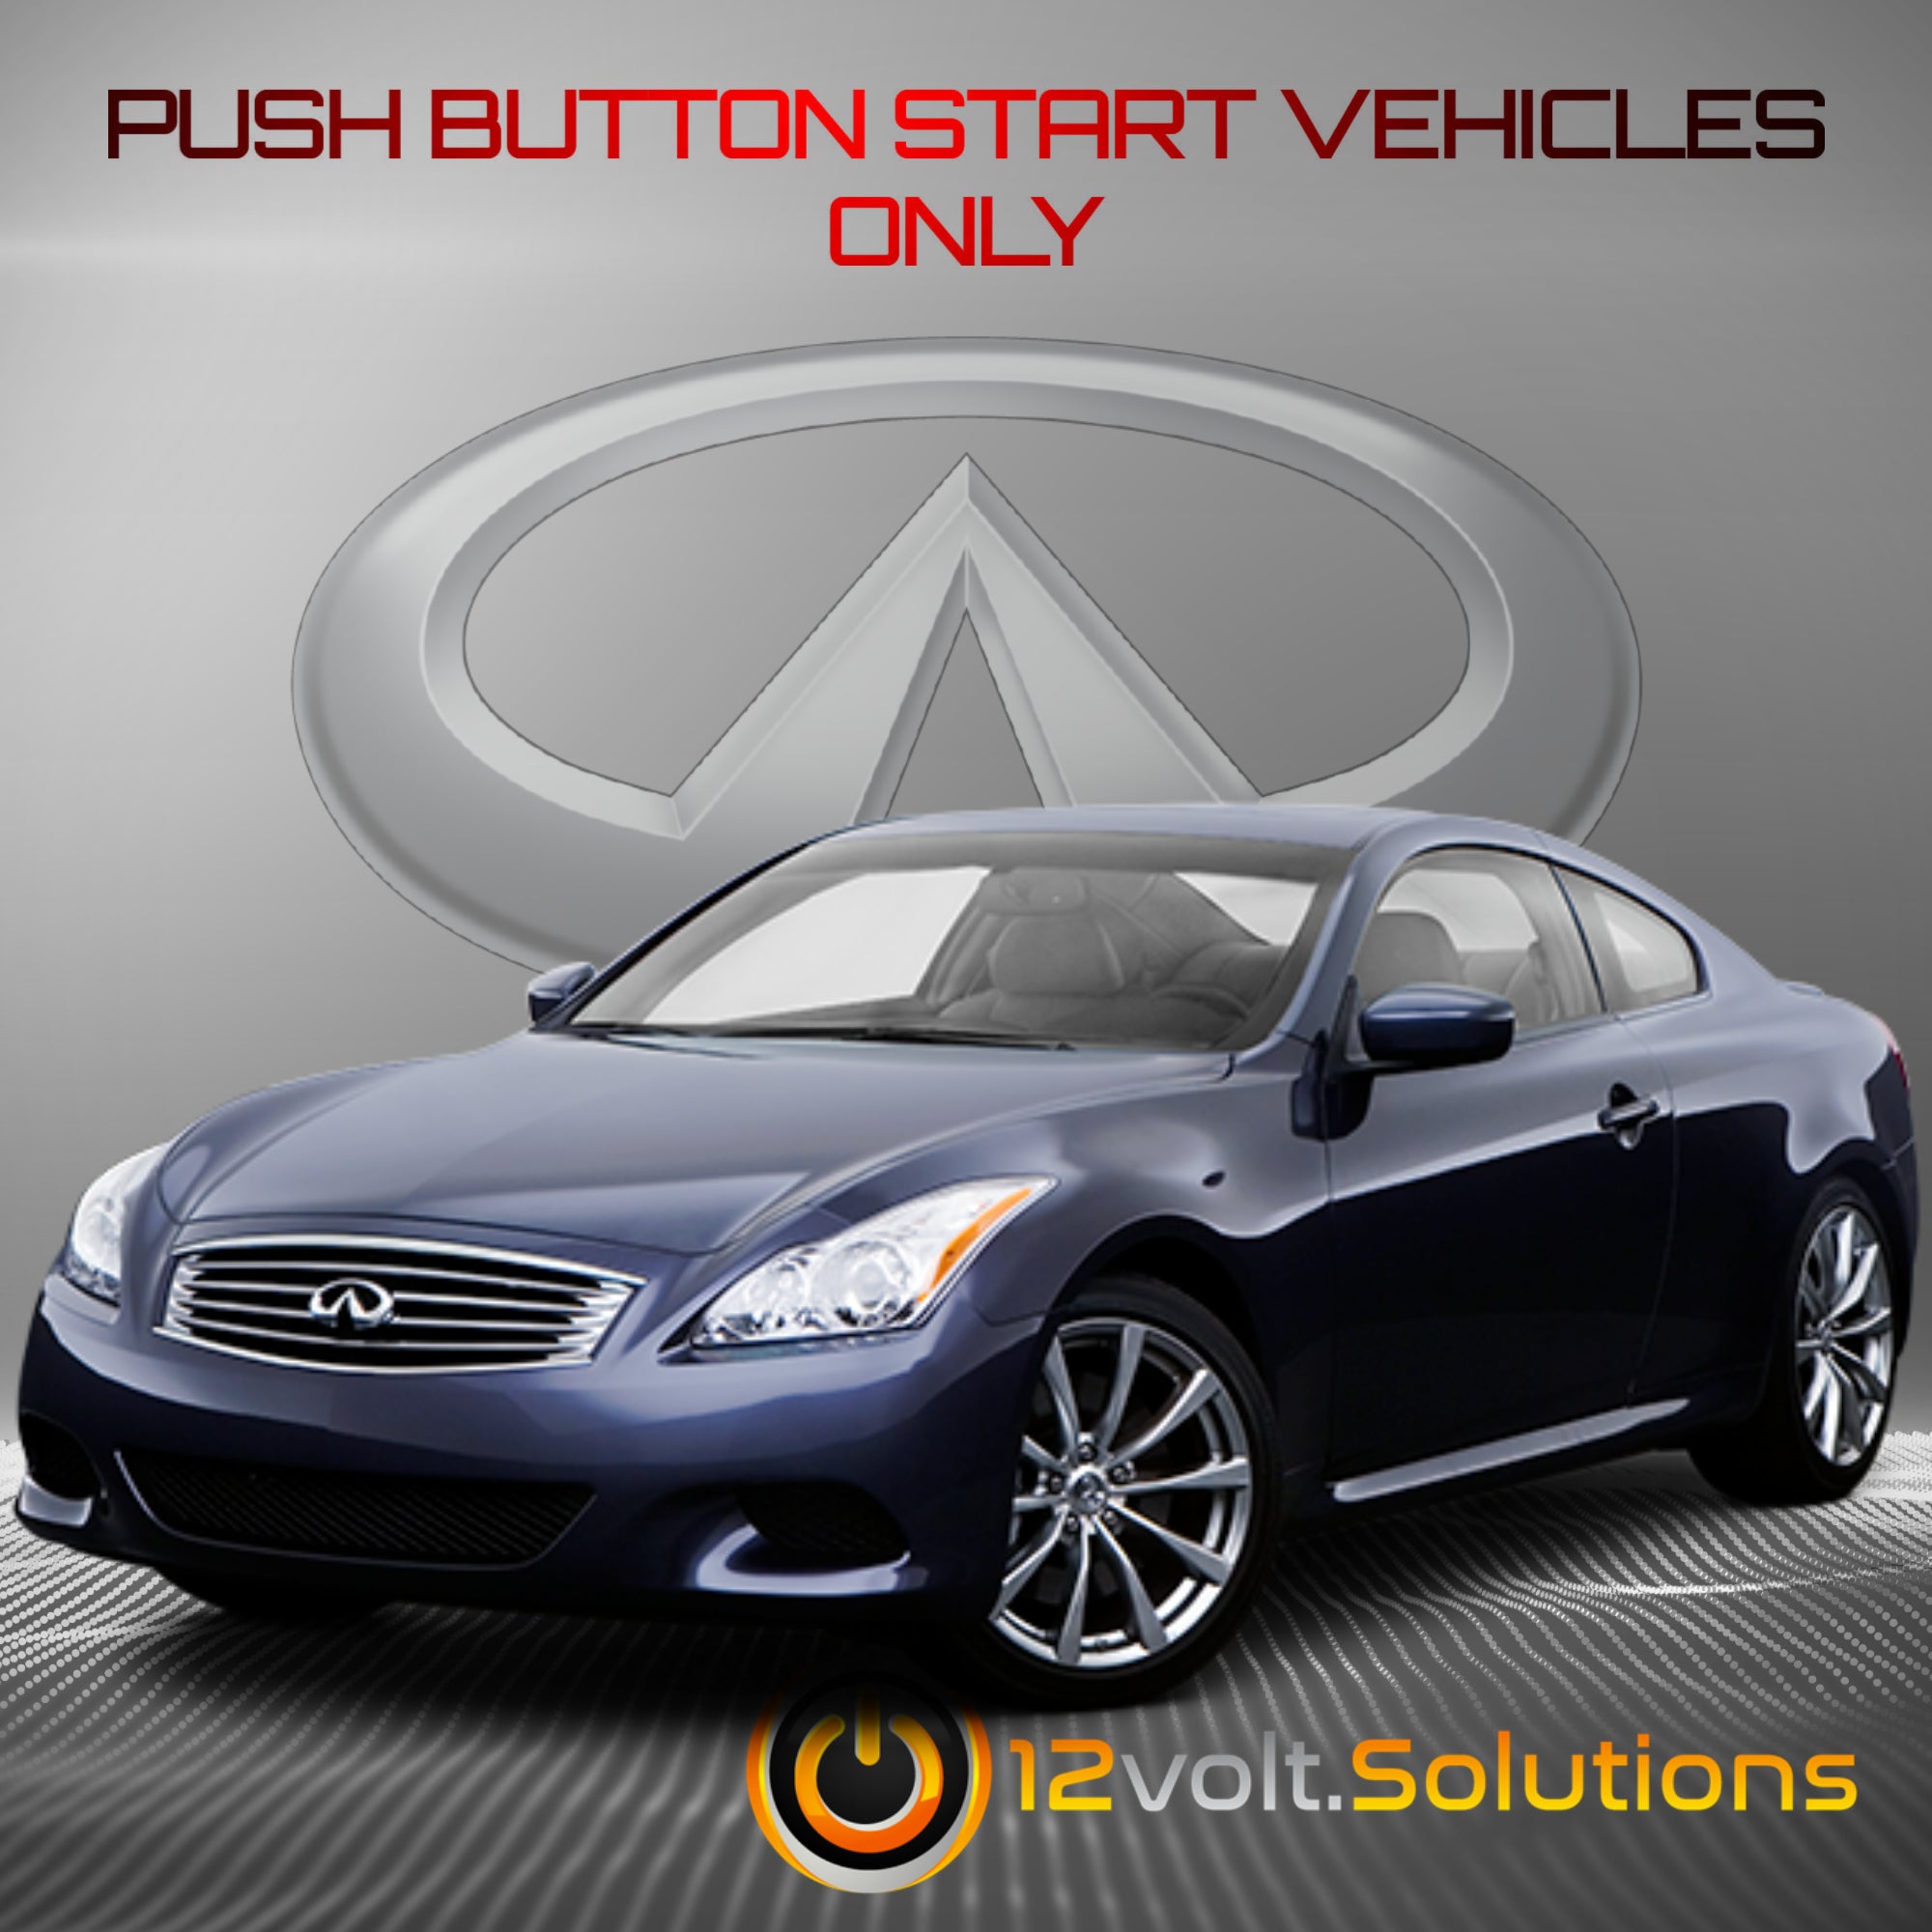 2011-2012 Infiniti G25 Remote Start Plug and Play Kit (Push Button Start)-12Volt.Solutions